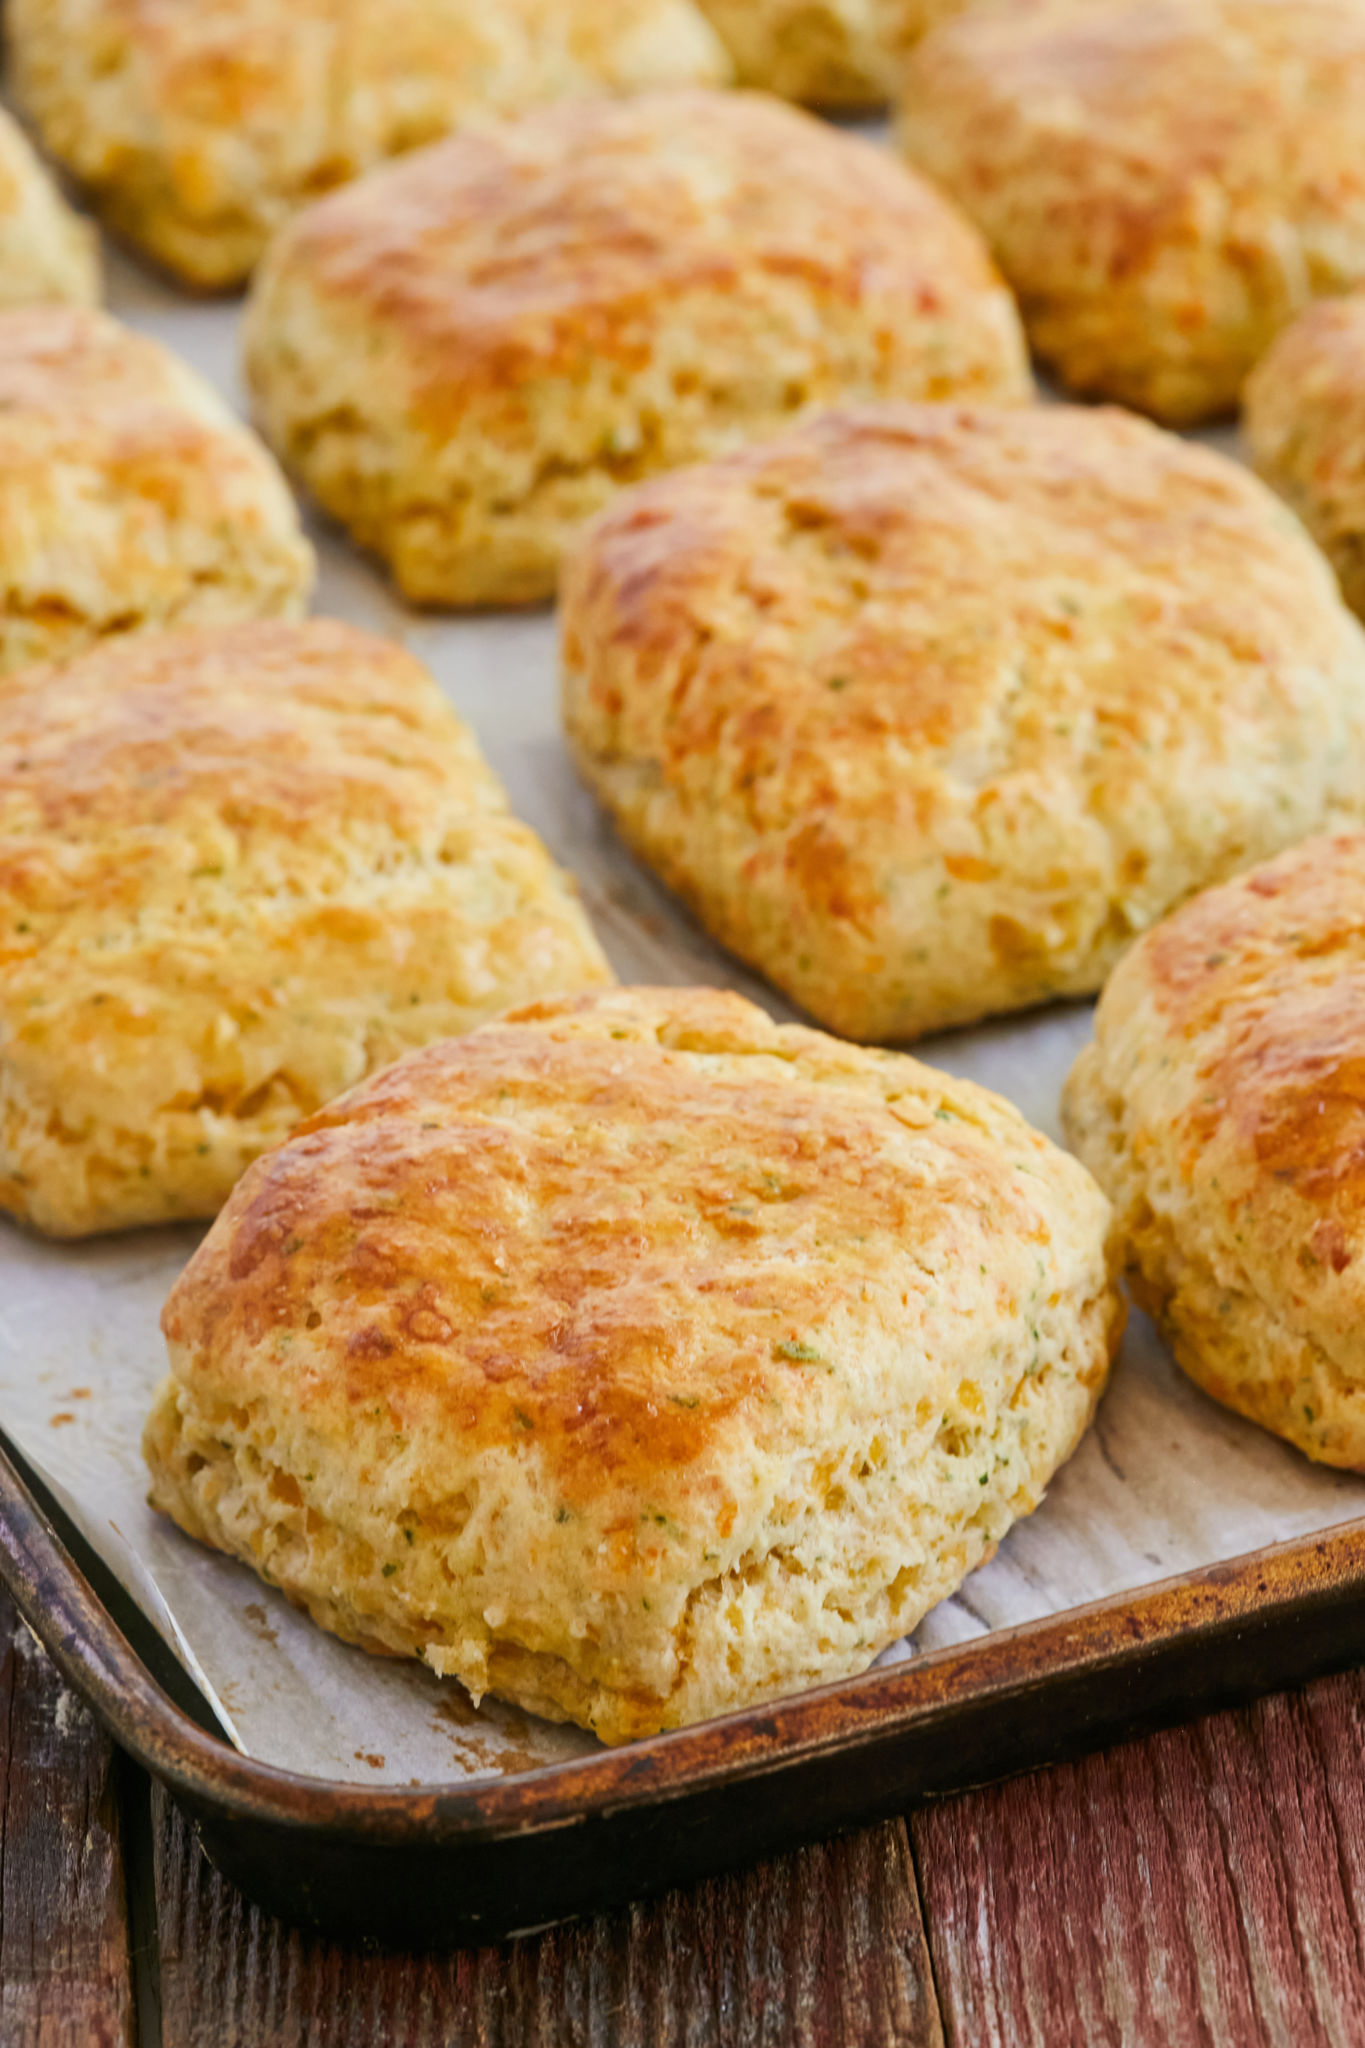 A close up of my cheddar and sage biscuits after baking.